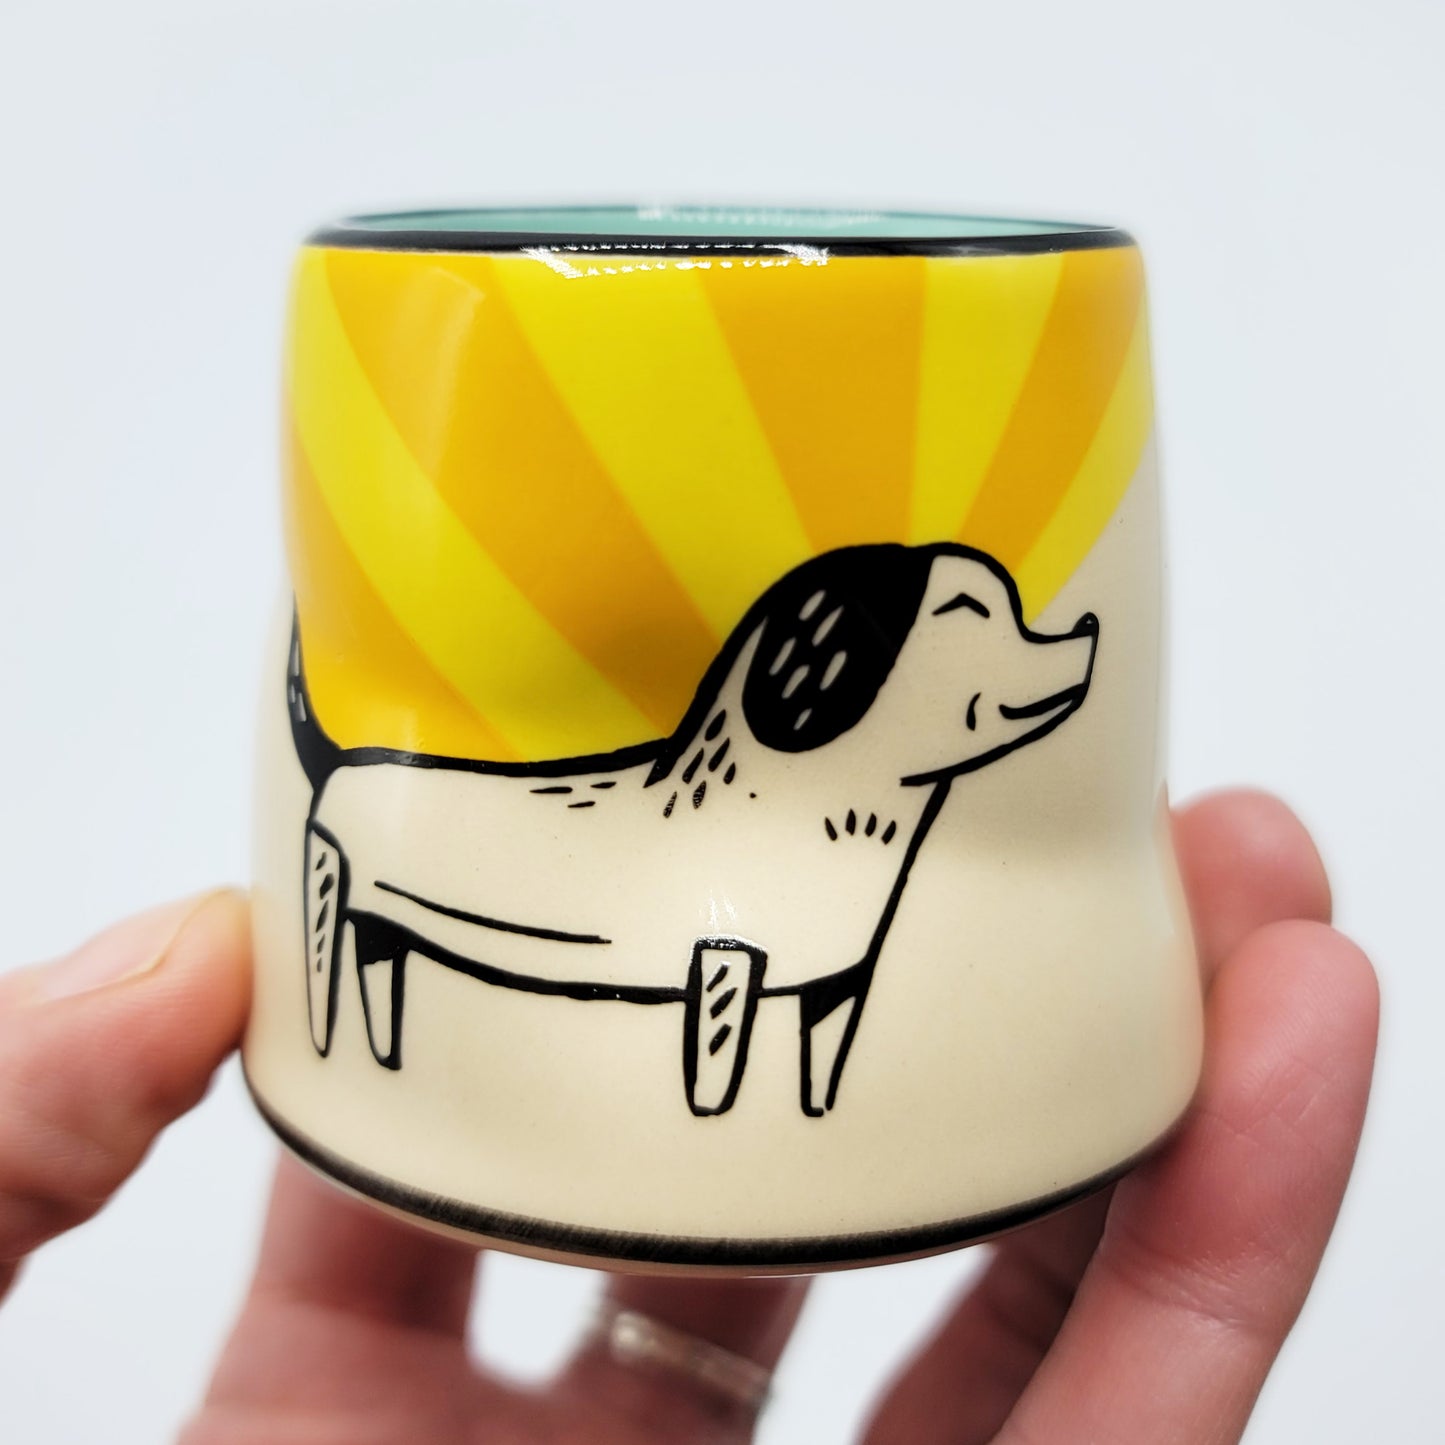 Little Dog Lucky Cup - Small